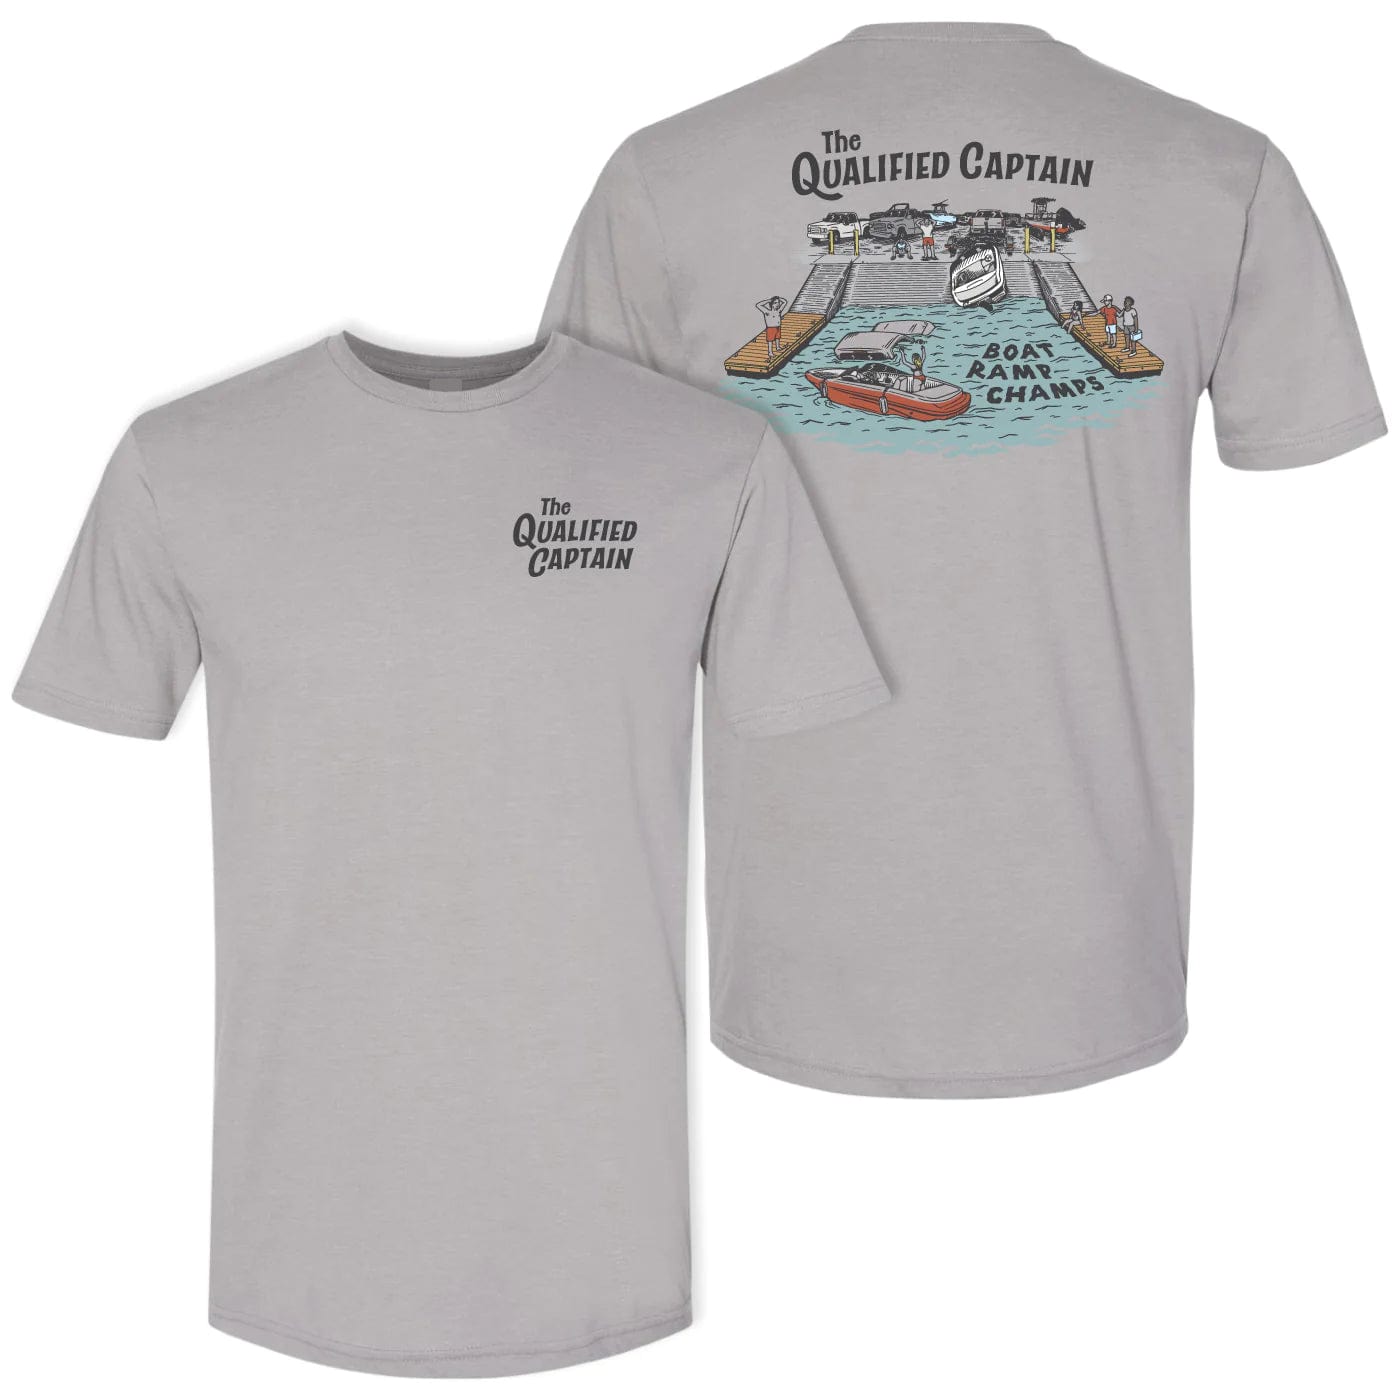 Qualified Captain Boat Ramp Champ Tee